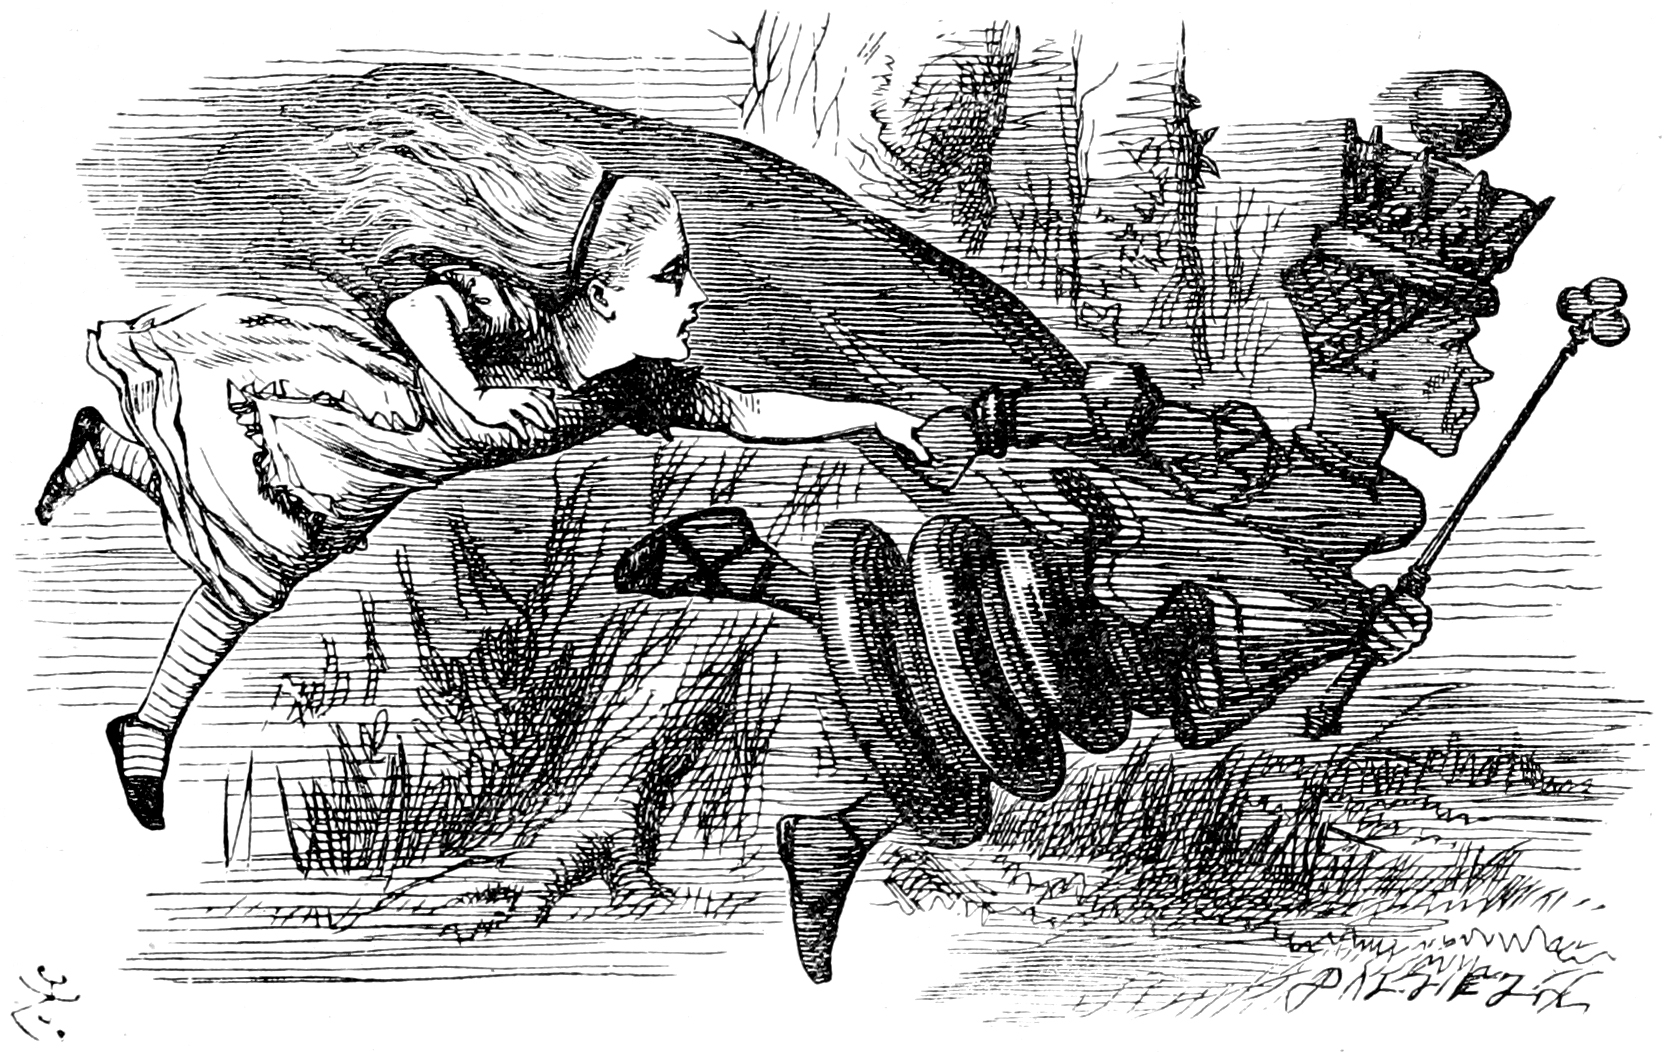 Illustration of Alice in Wonderland chasing the Red Queen